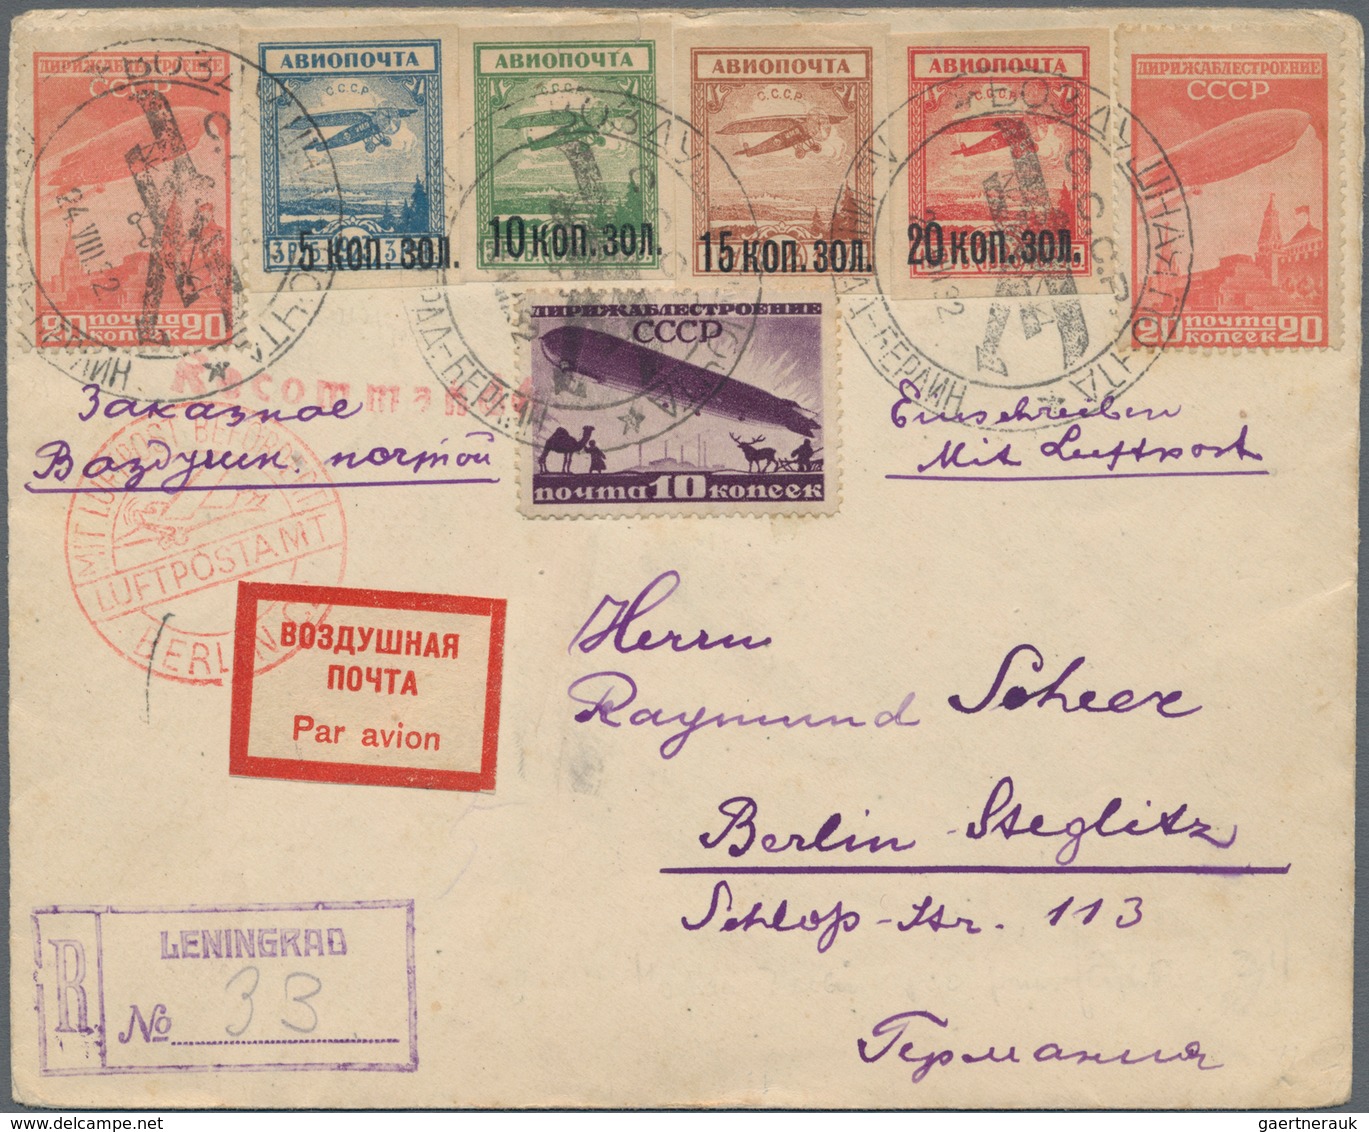 Sowjetunion: 1932 Registered Airmail Cover From Leningrad To Berlin, Germany Franked By 1931 Zeppeli - Covers & Documents